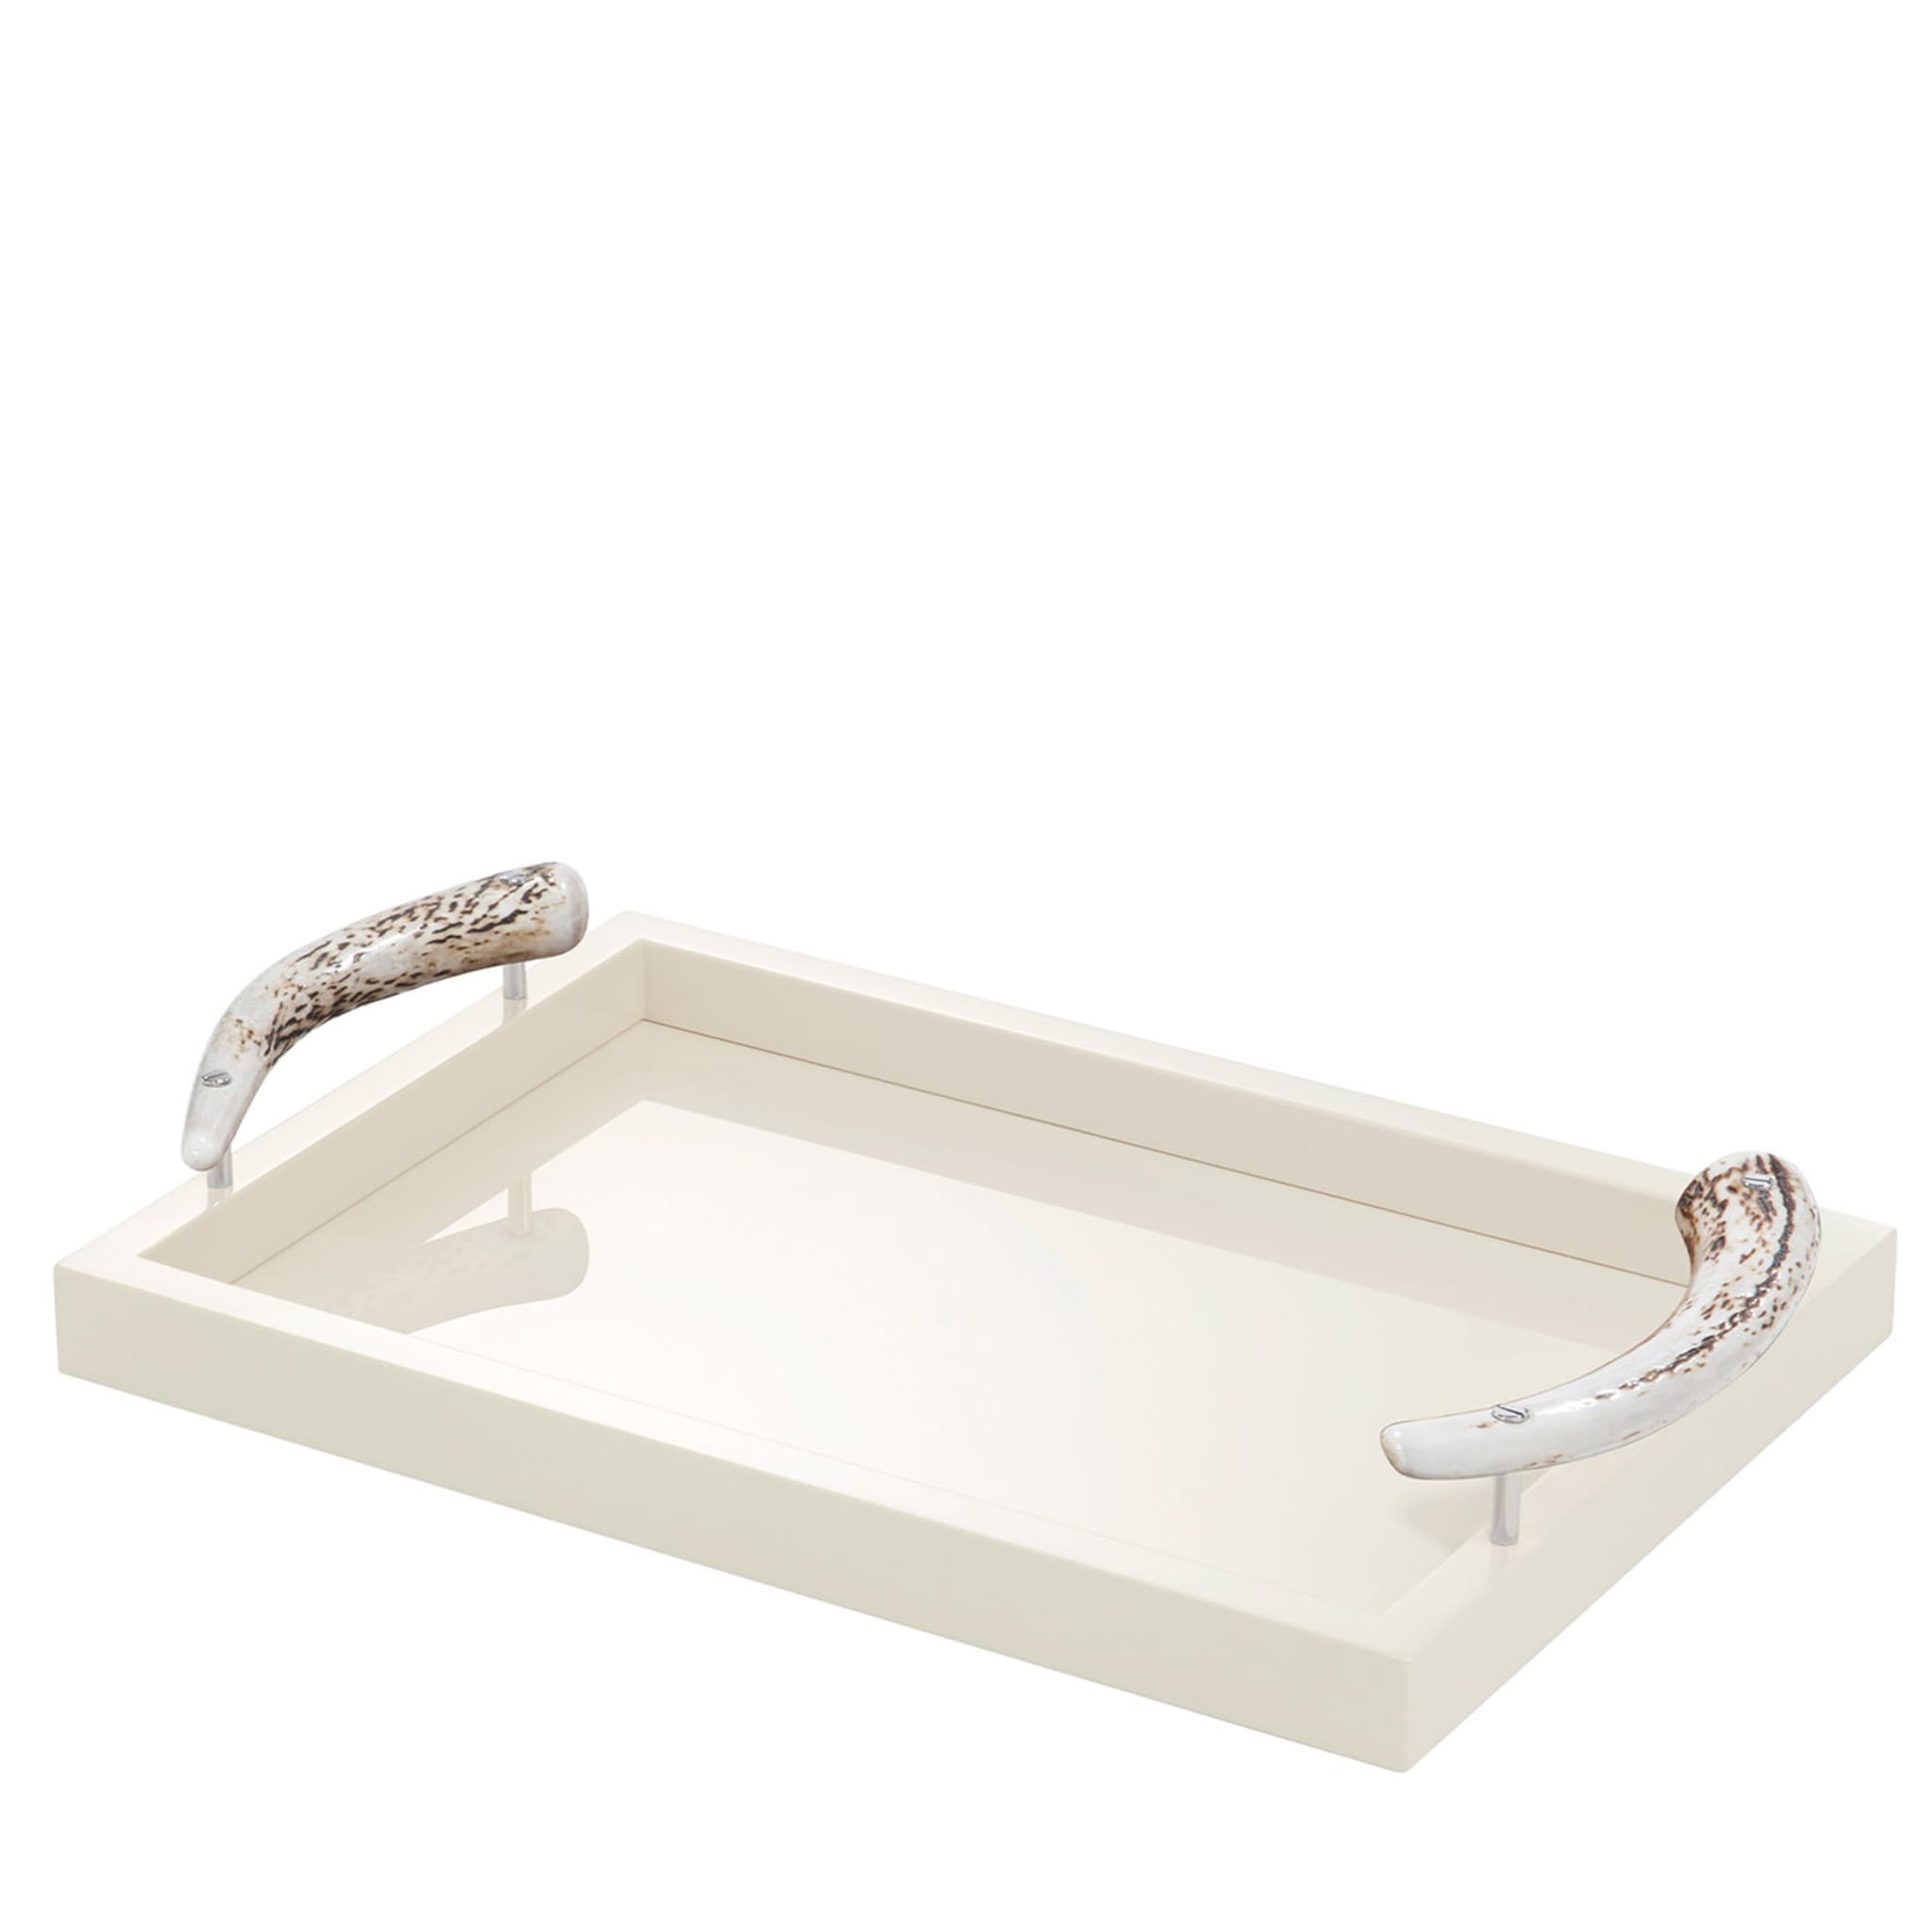 Dafne Lacquer Rectangular Tray Small - Main view